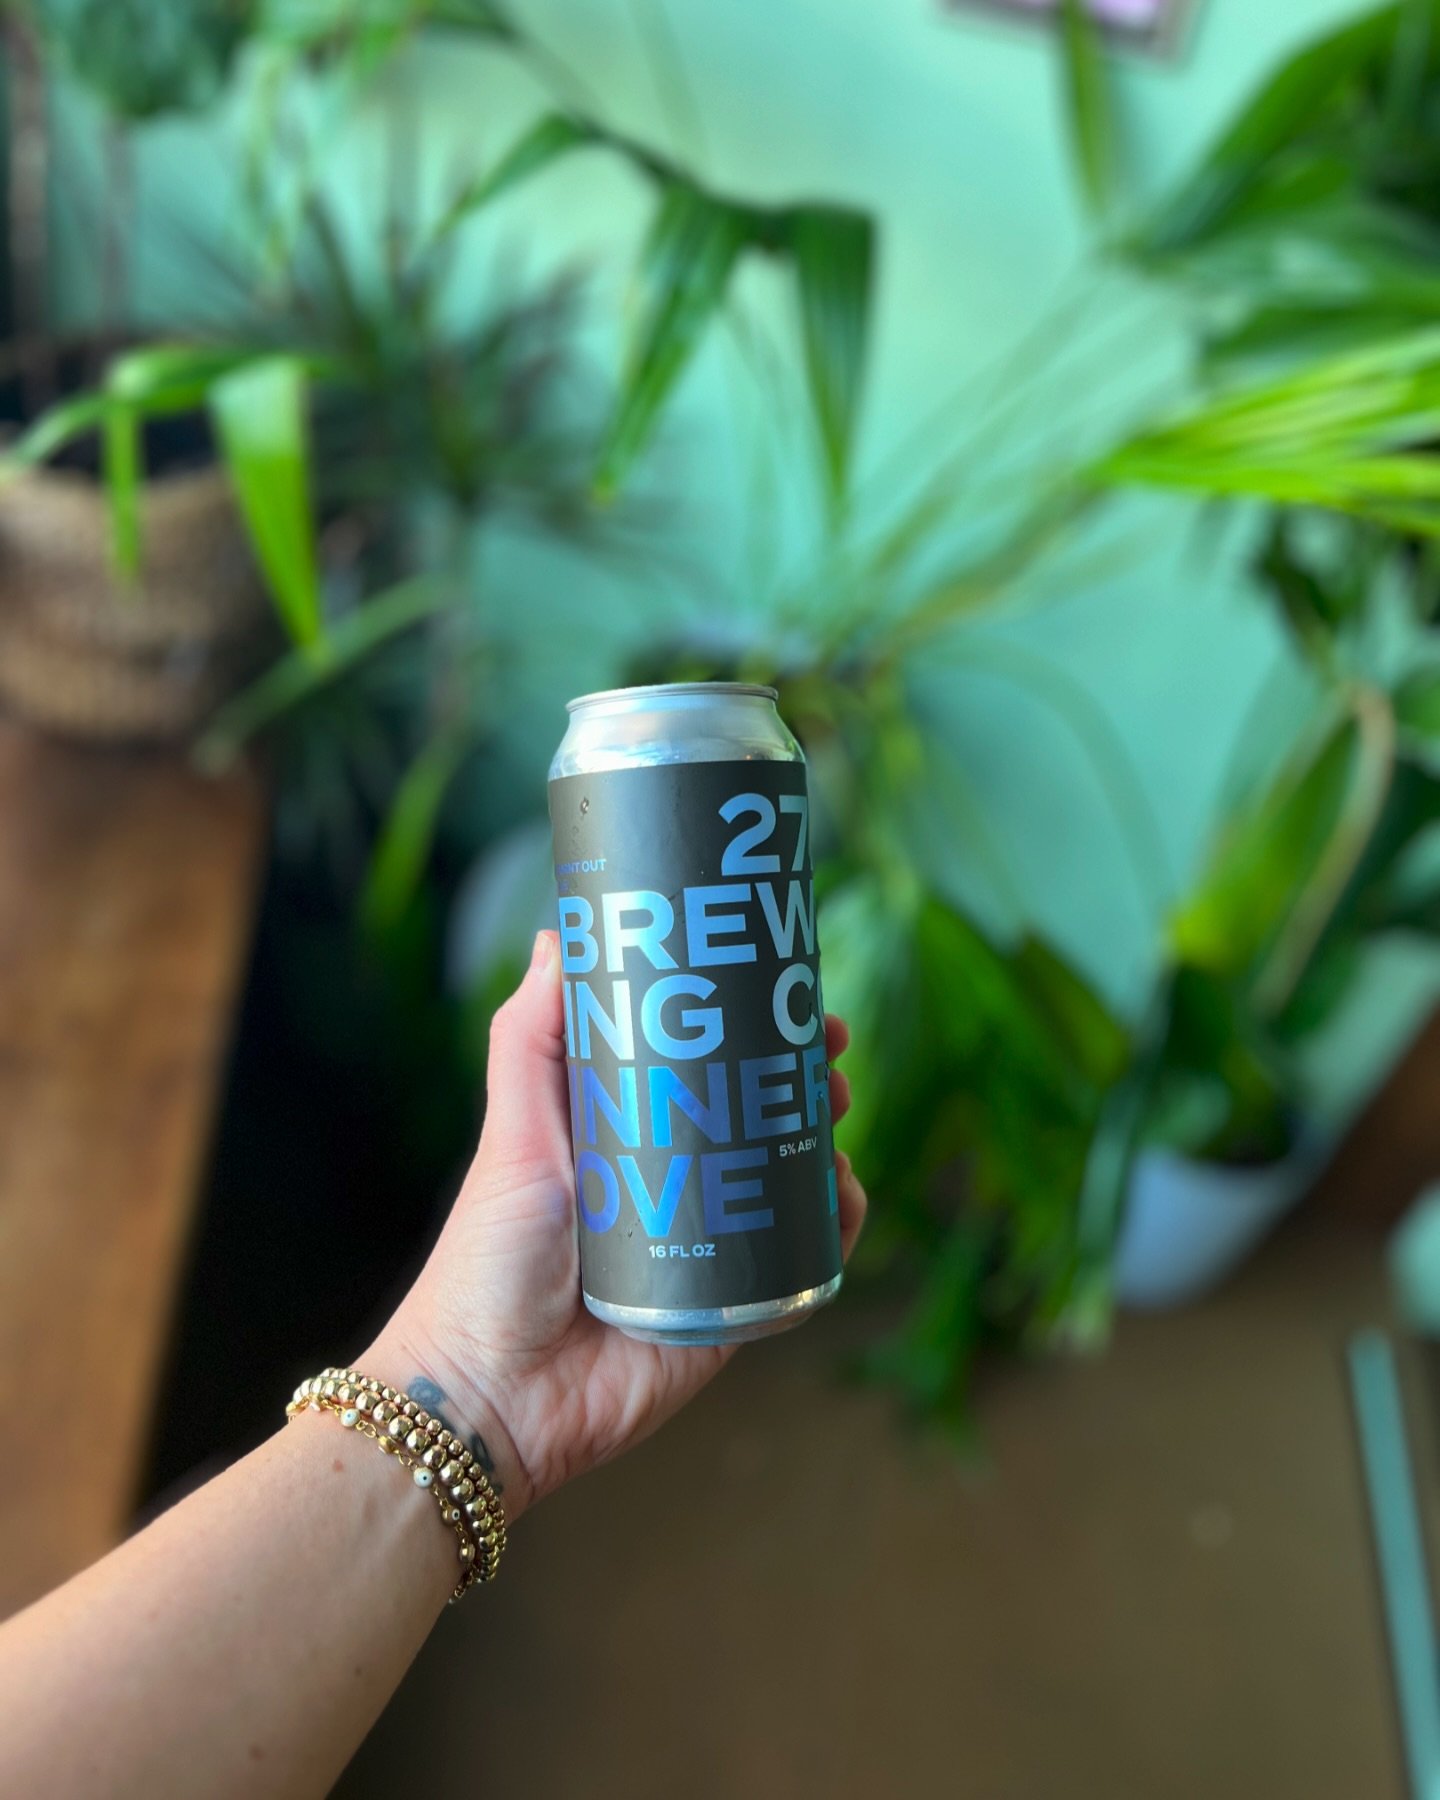 Happy Friday! A new 💙 fan fave 💙 is back on the menu today. Burnt Out Golden Ale is a beer we brewed with our buds @_innerlove with all NYS ingredients. It&rsquo;s a perfect pairing to drink while listening of our favorite records by them, Roscoe ?